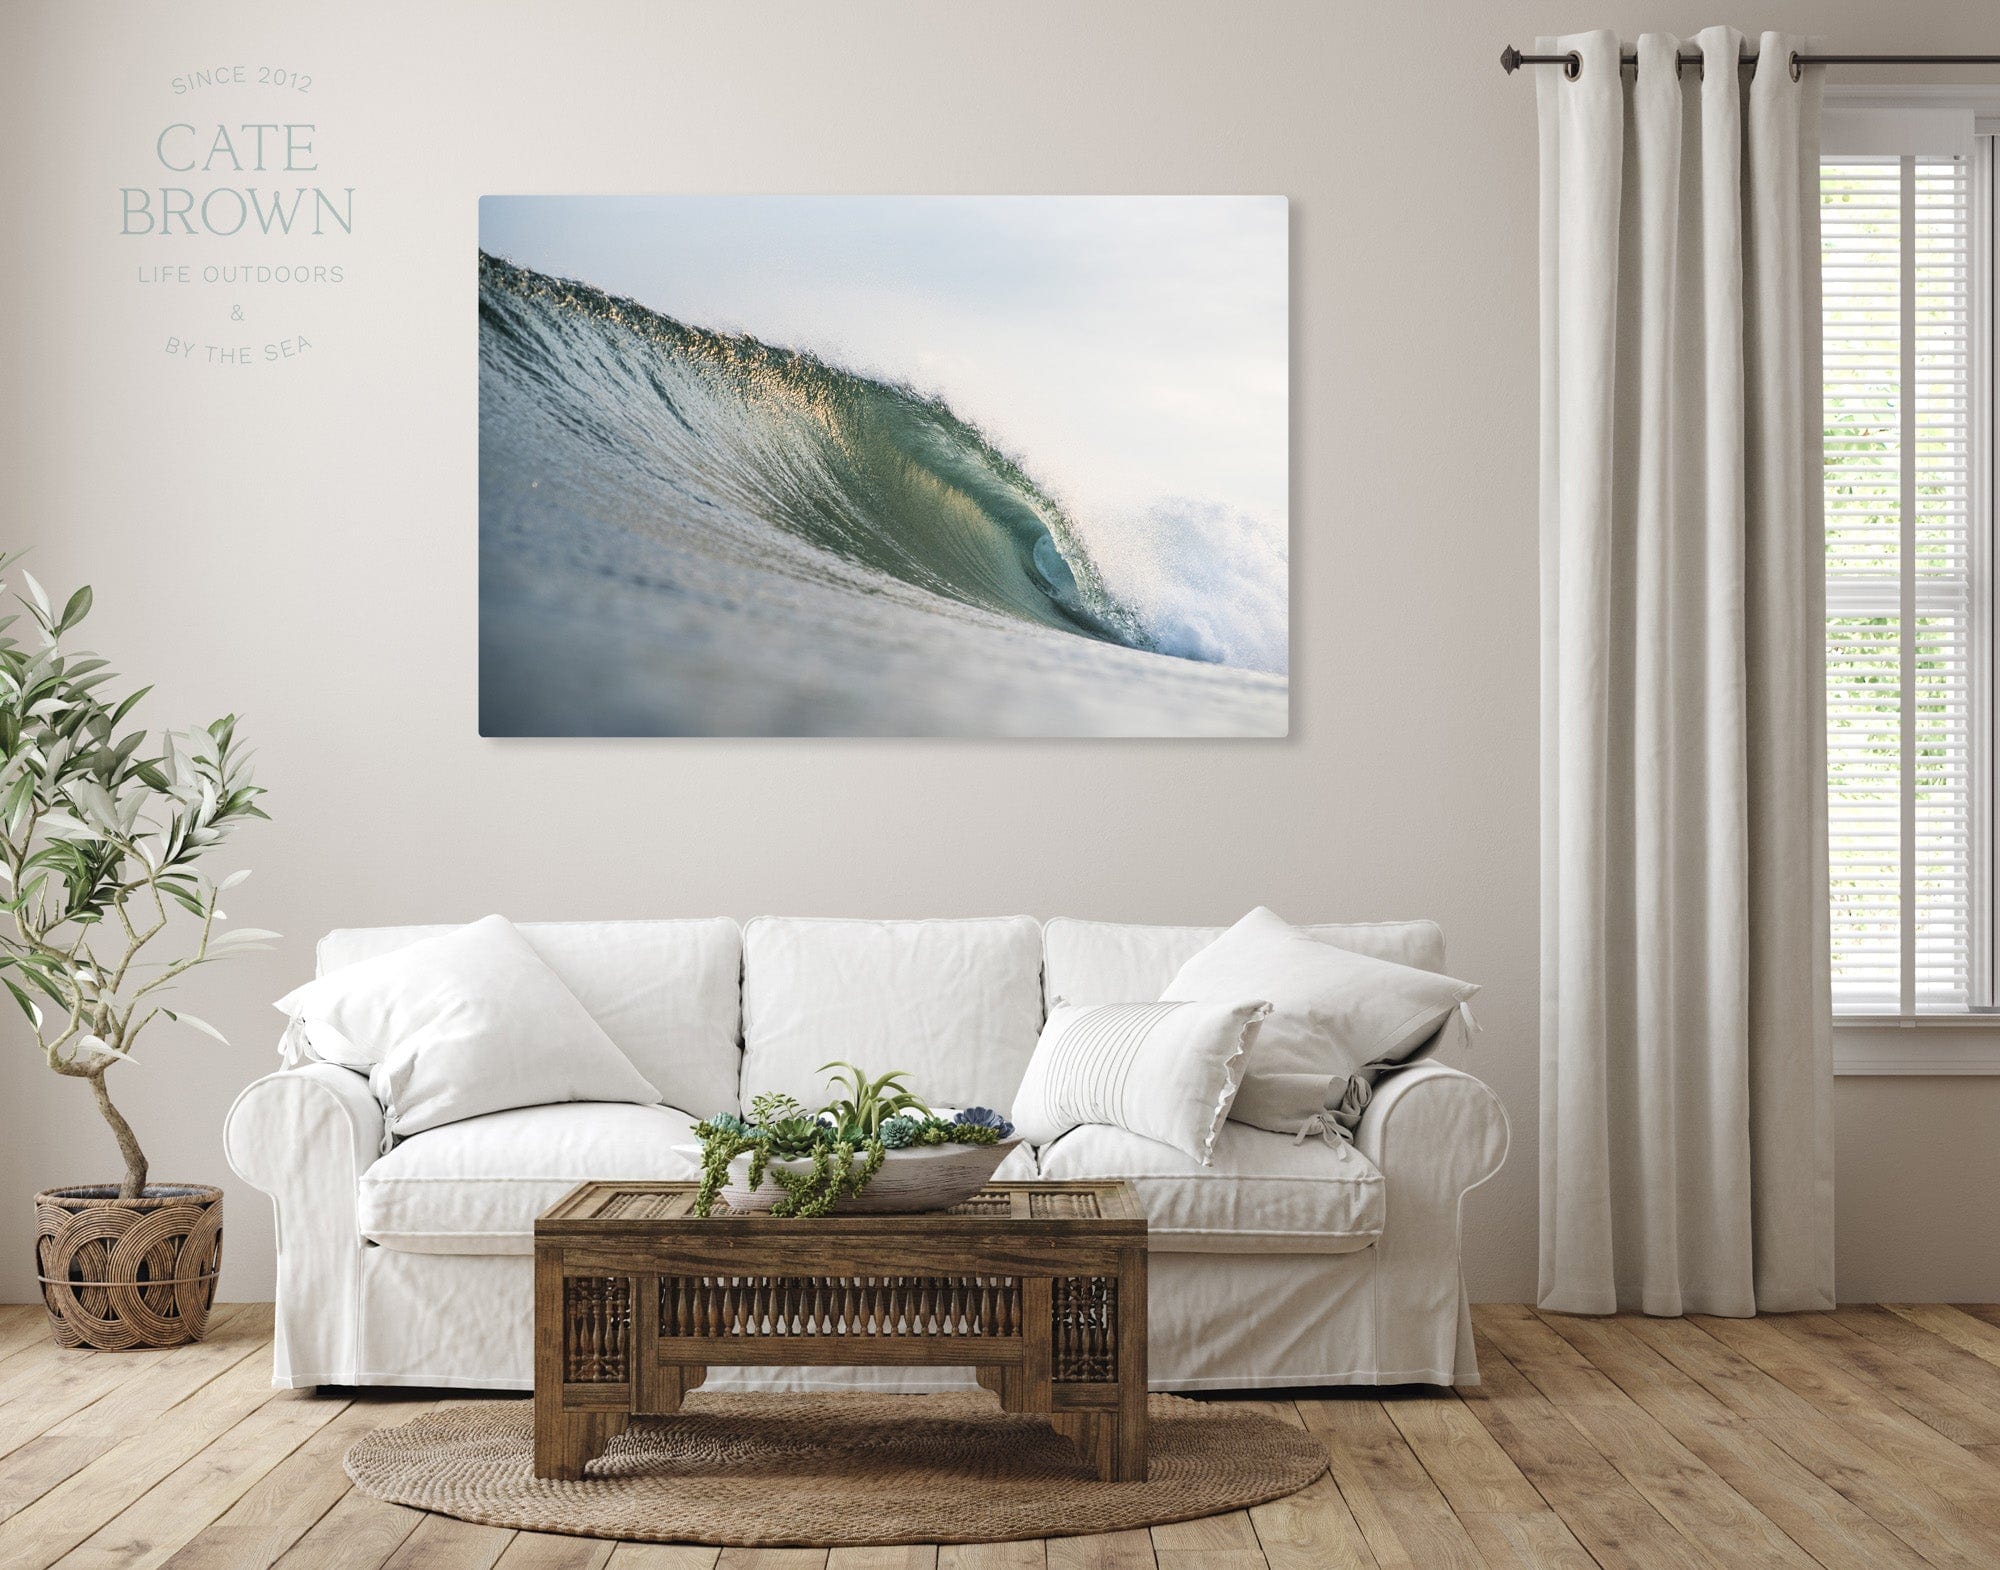 Cate Brown Photo Canvas / 16"x24" / None (Print Only) Listen, alone beside the sea  //  Ocean Photography Made to Order Ocean Fine Art